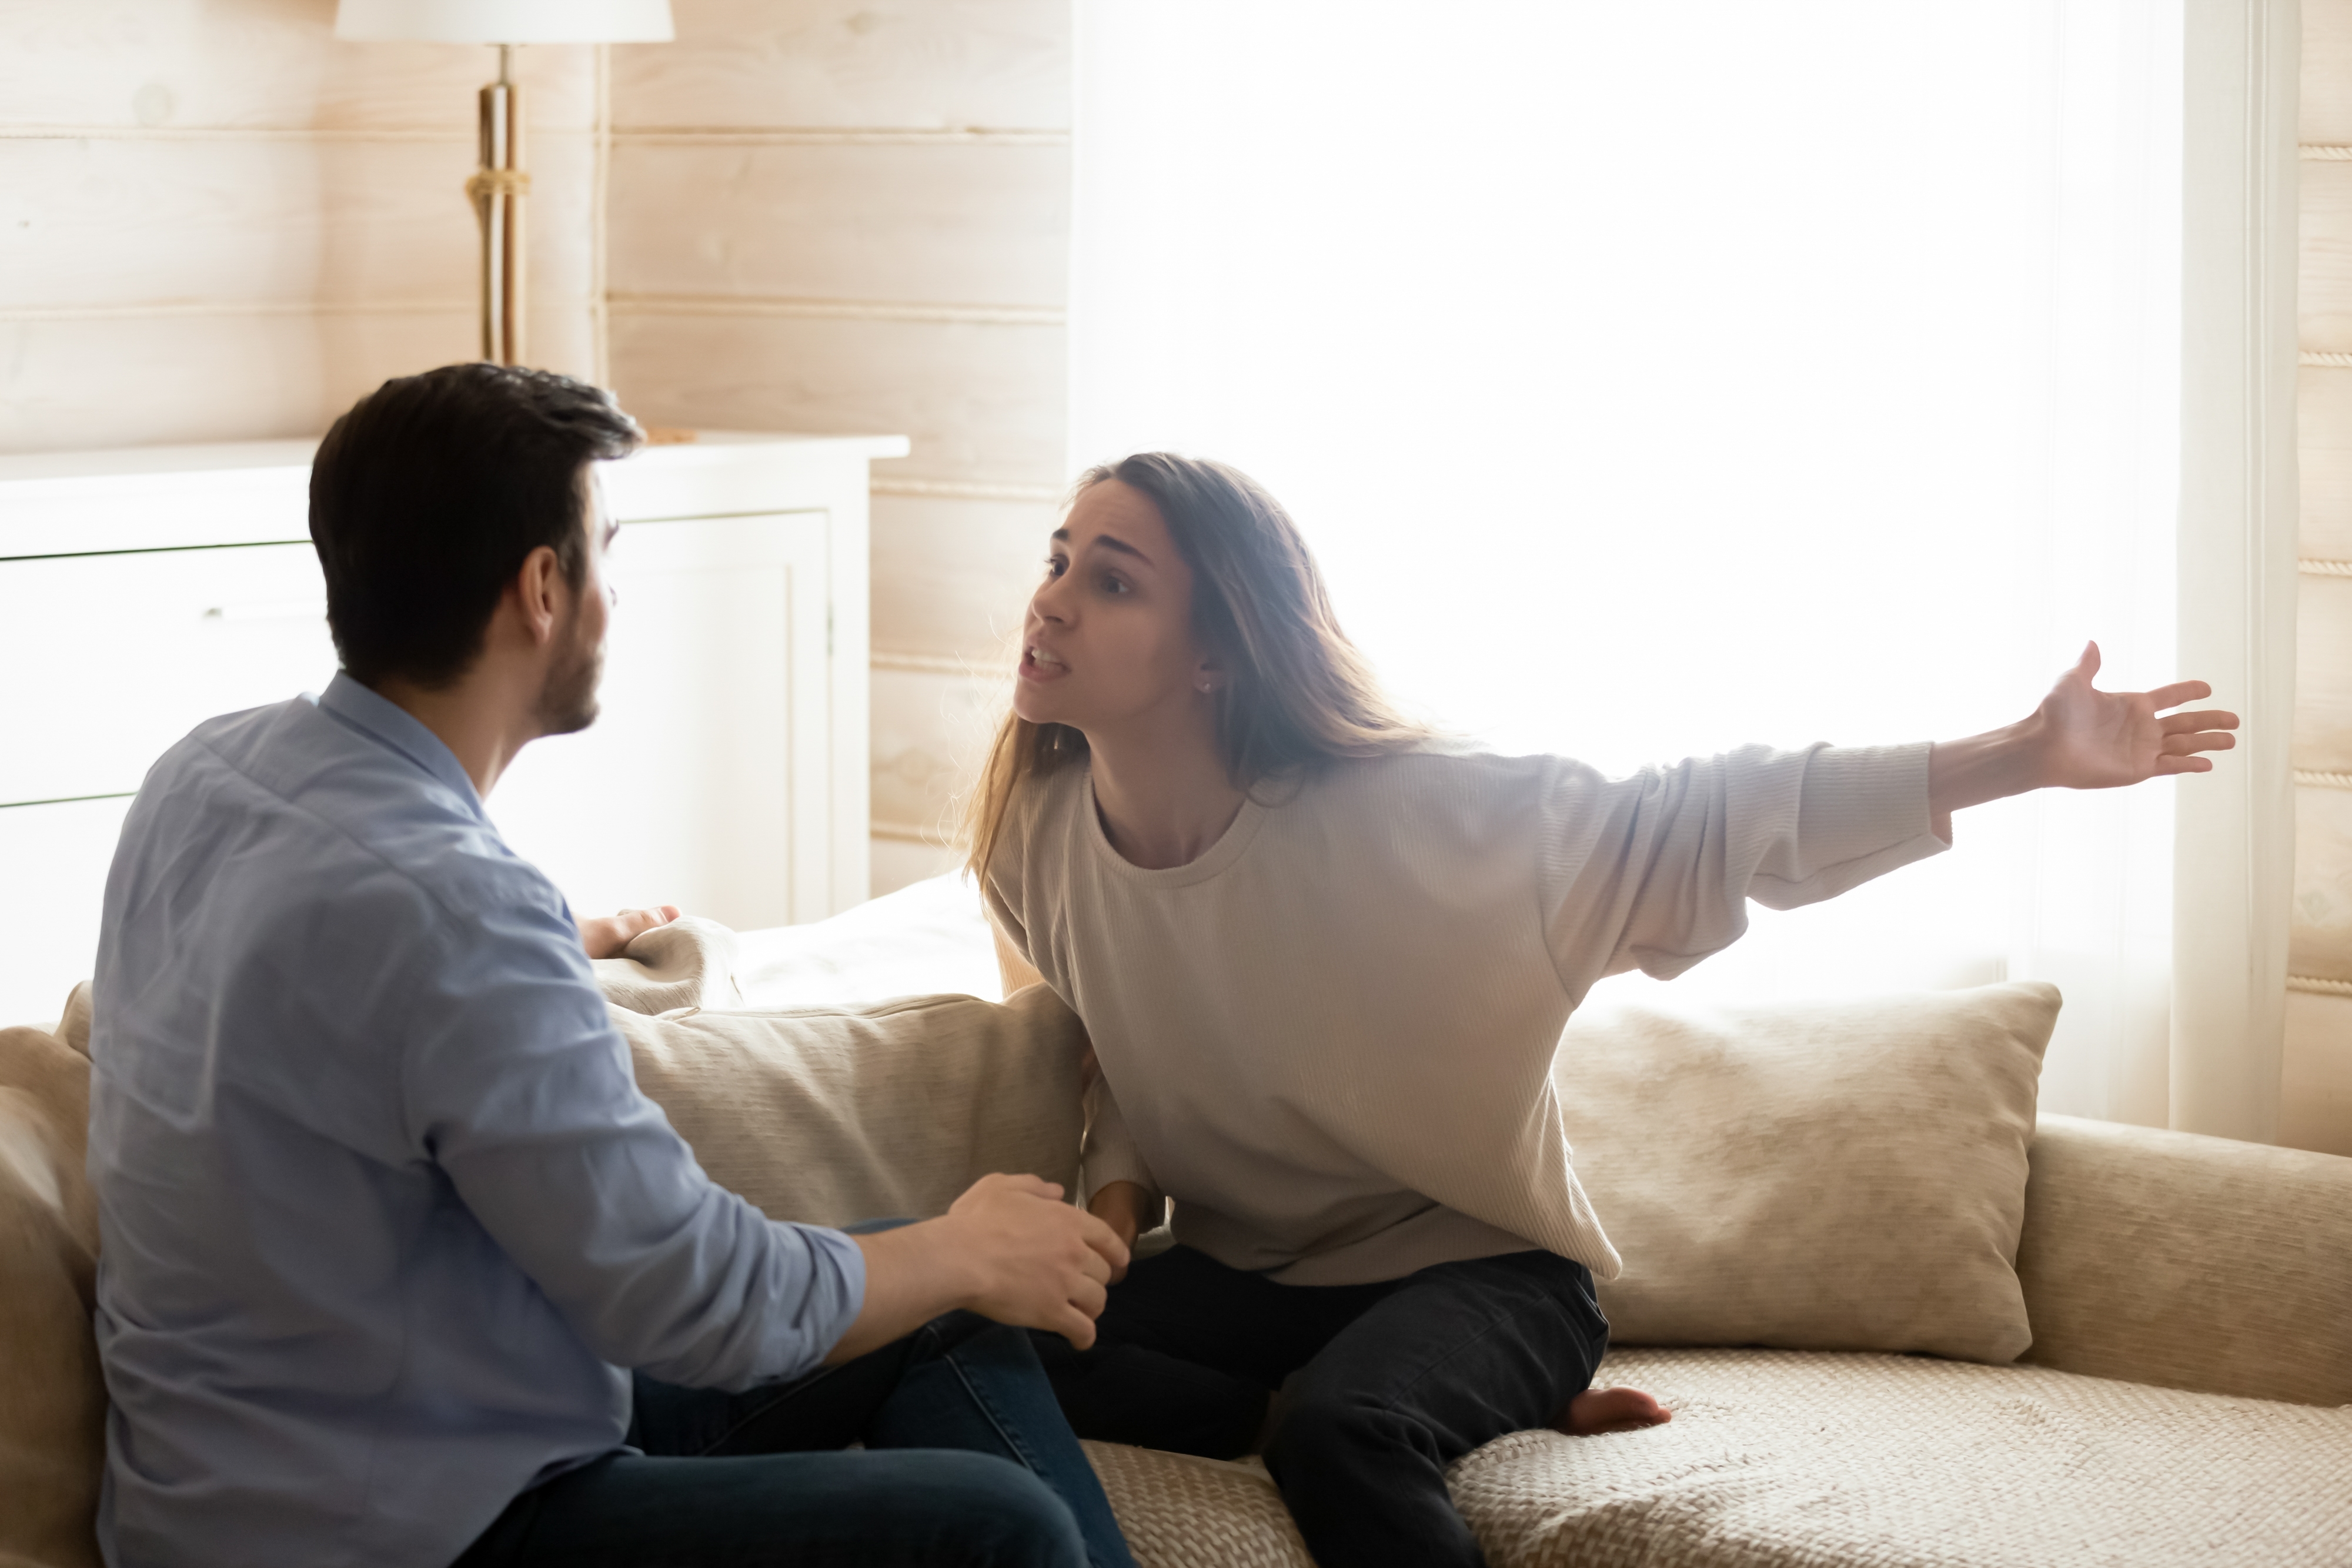 Couple arguing at home | Source: Shutterstock